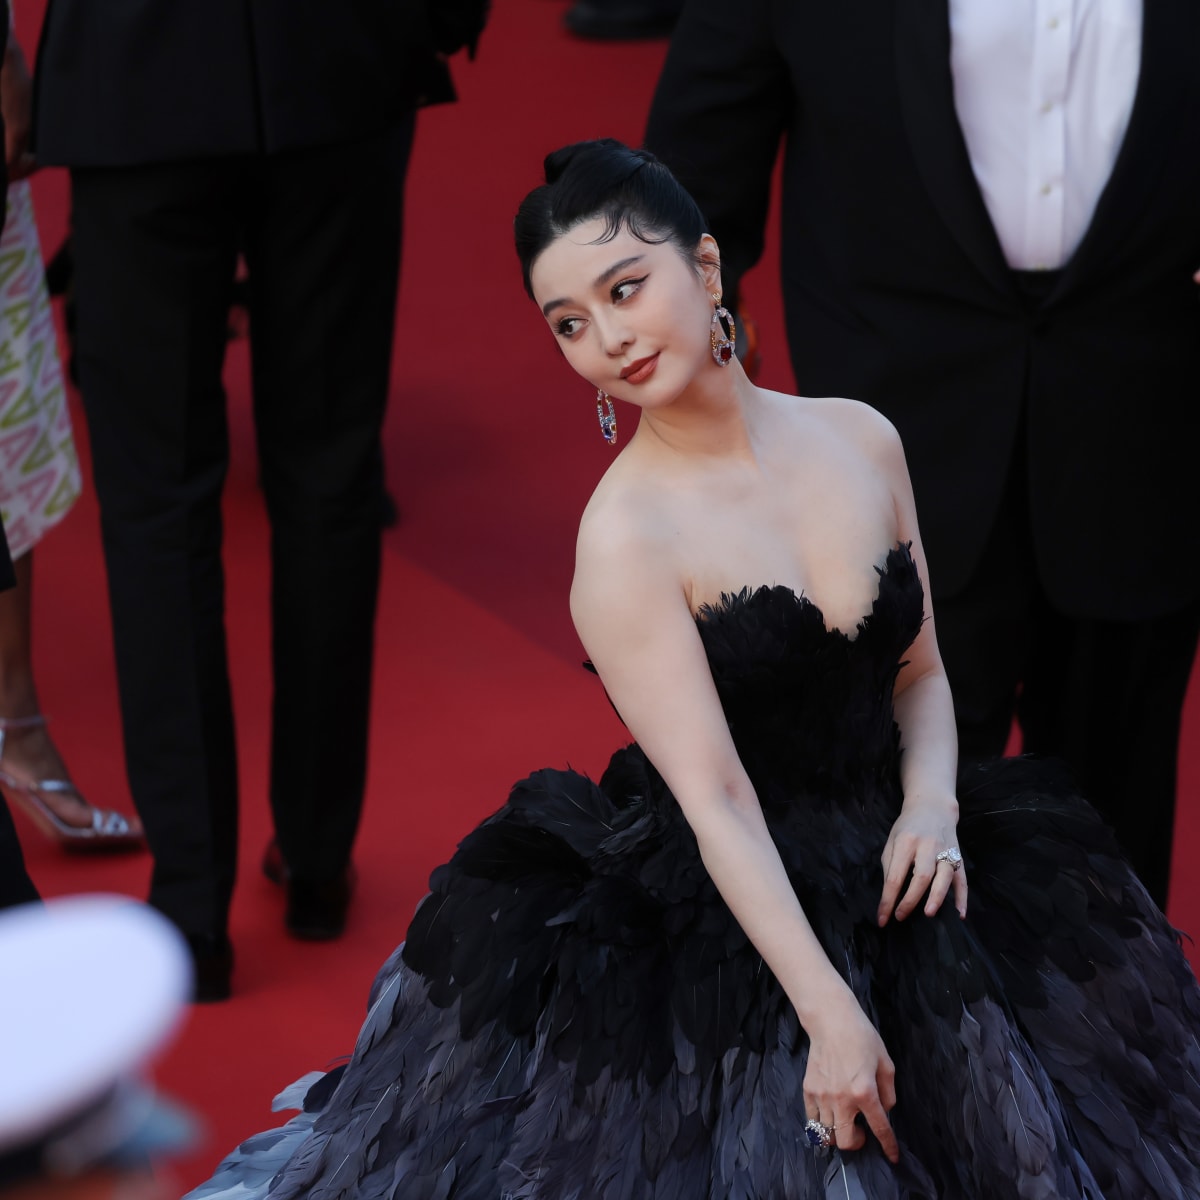 Cannes: The best celebrity fashion in 2019